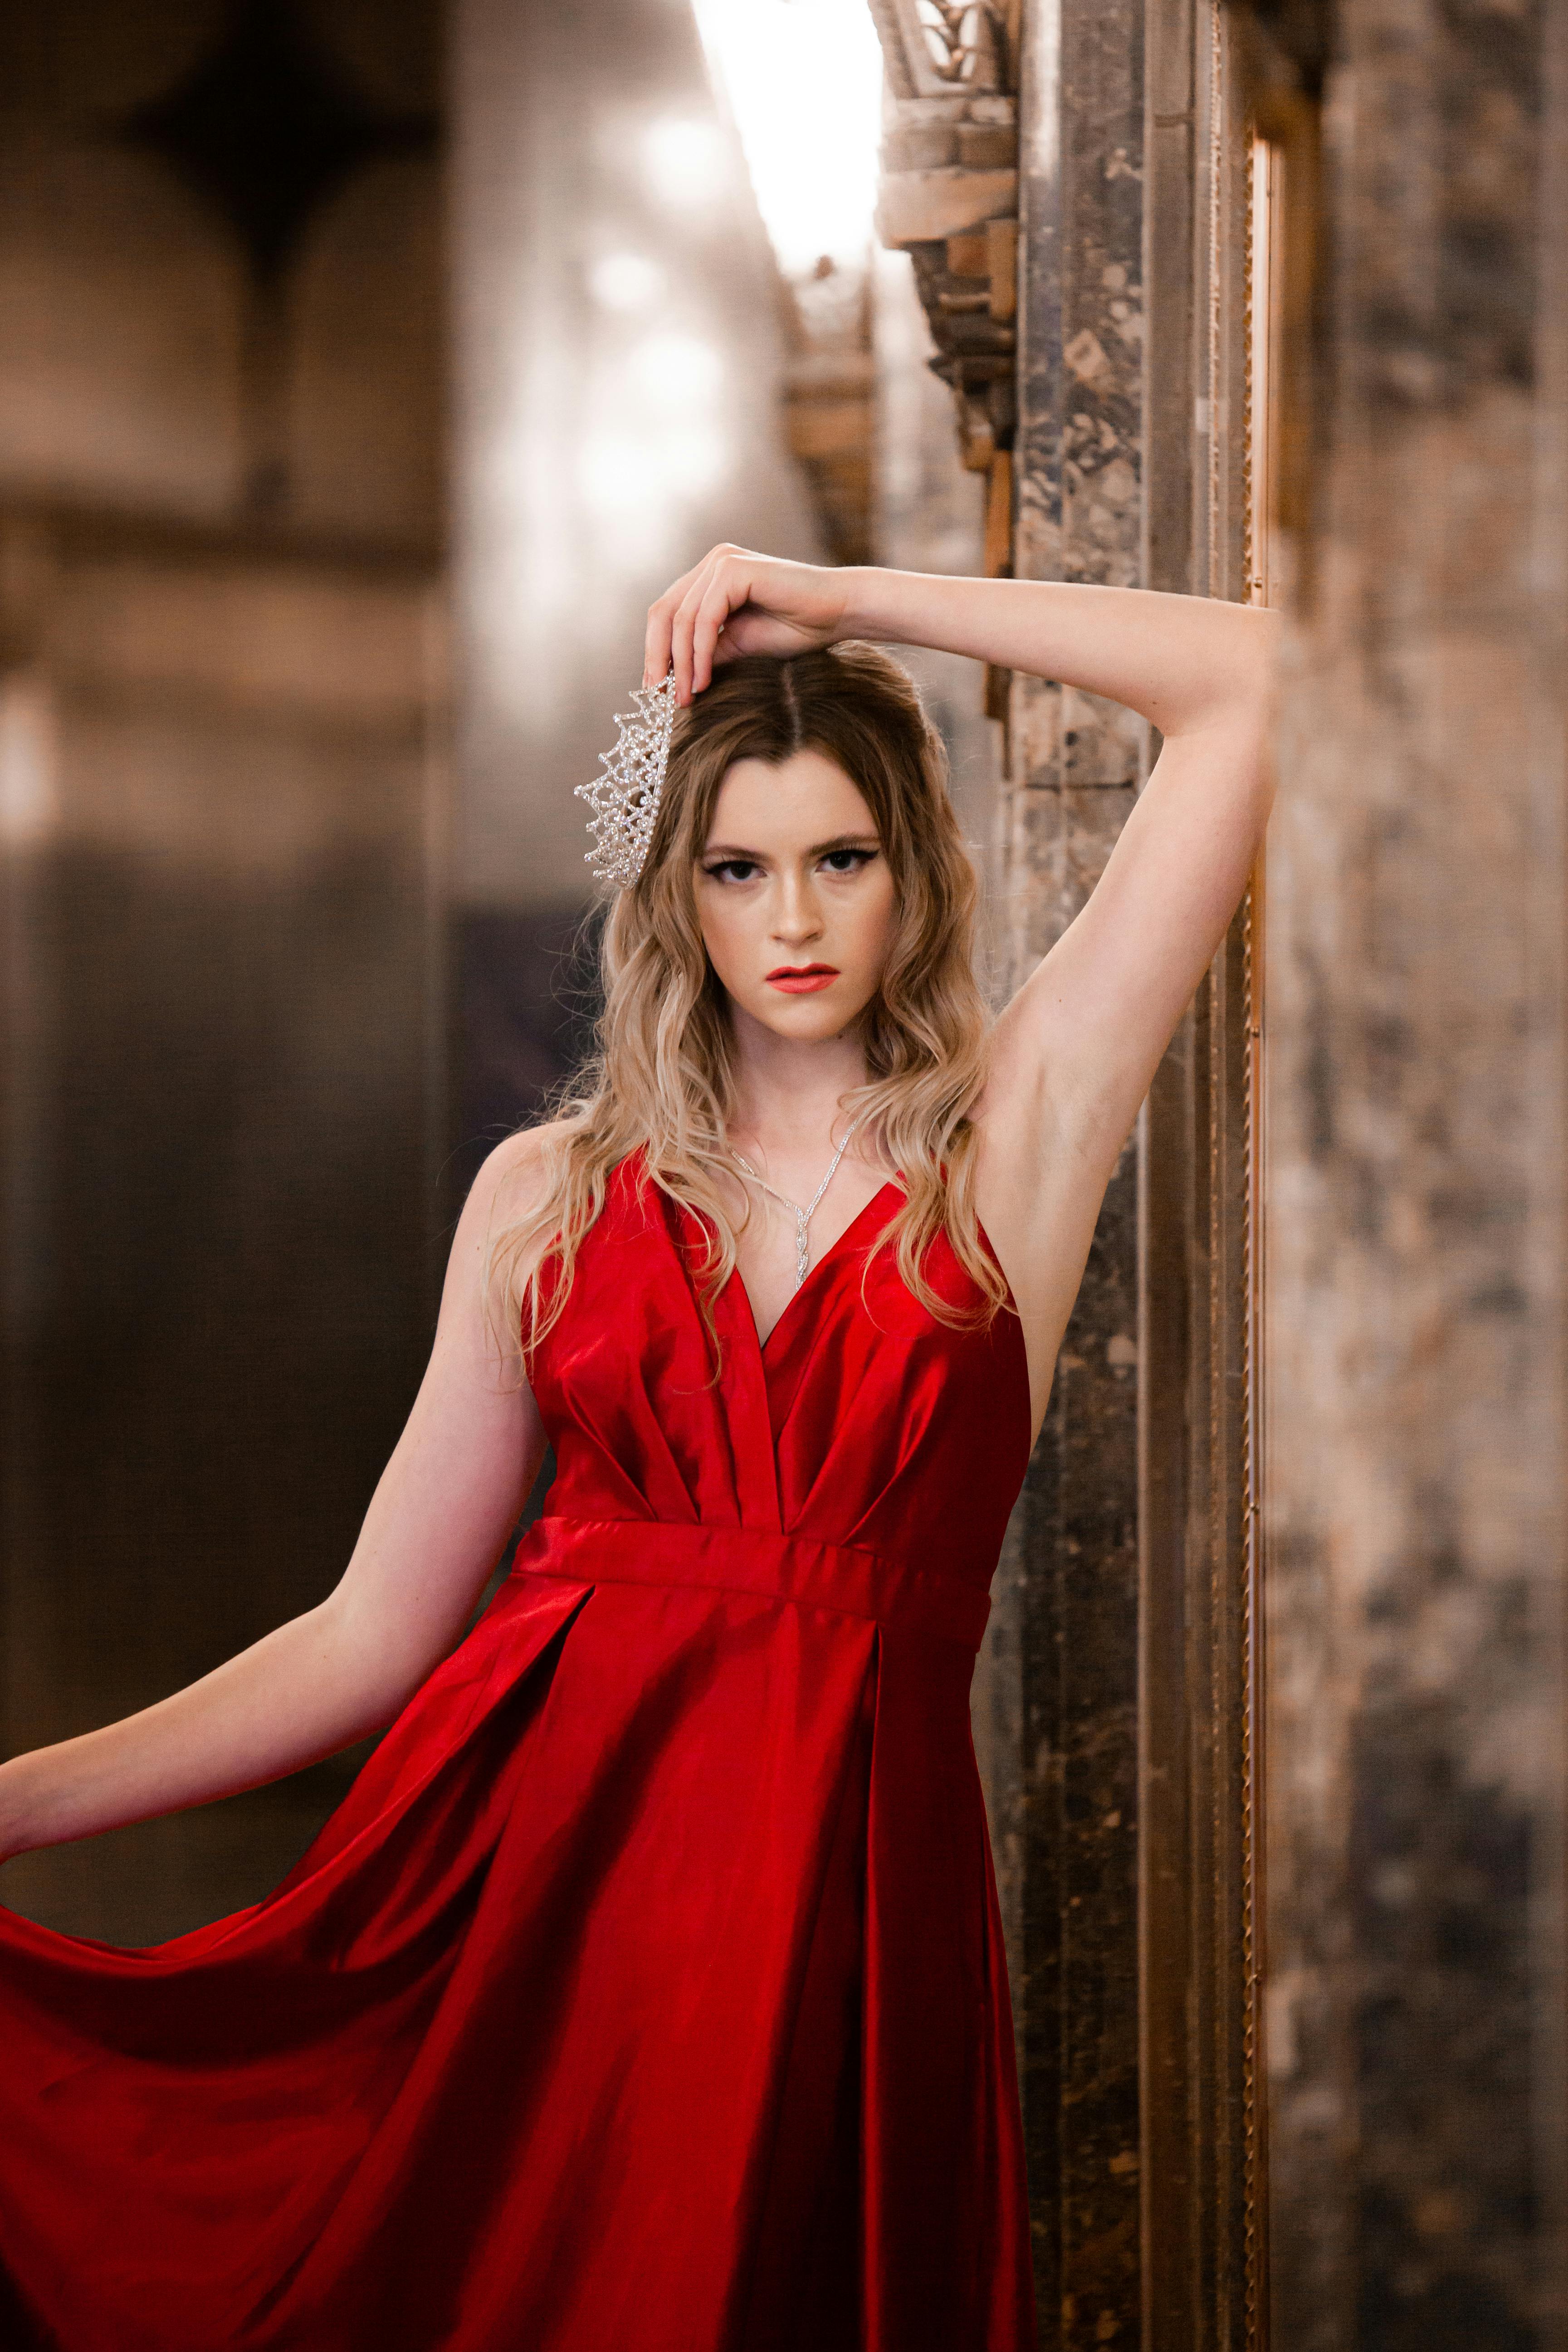 red Dress' Stock Photos and Images - 123RF